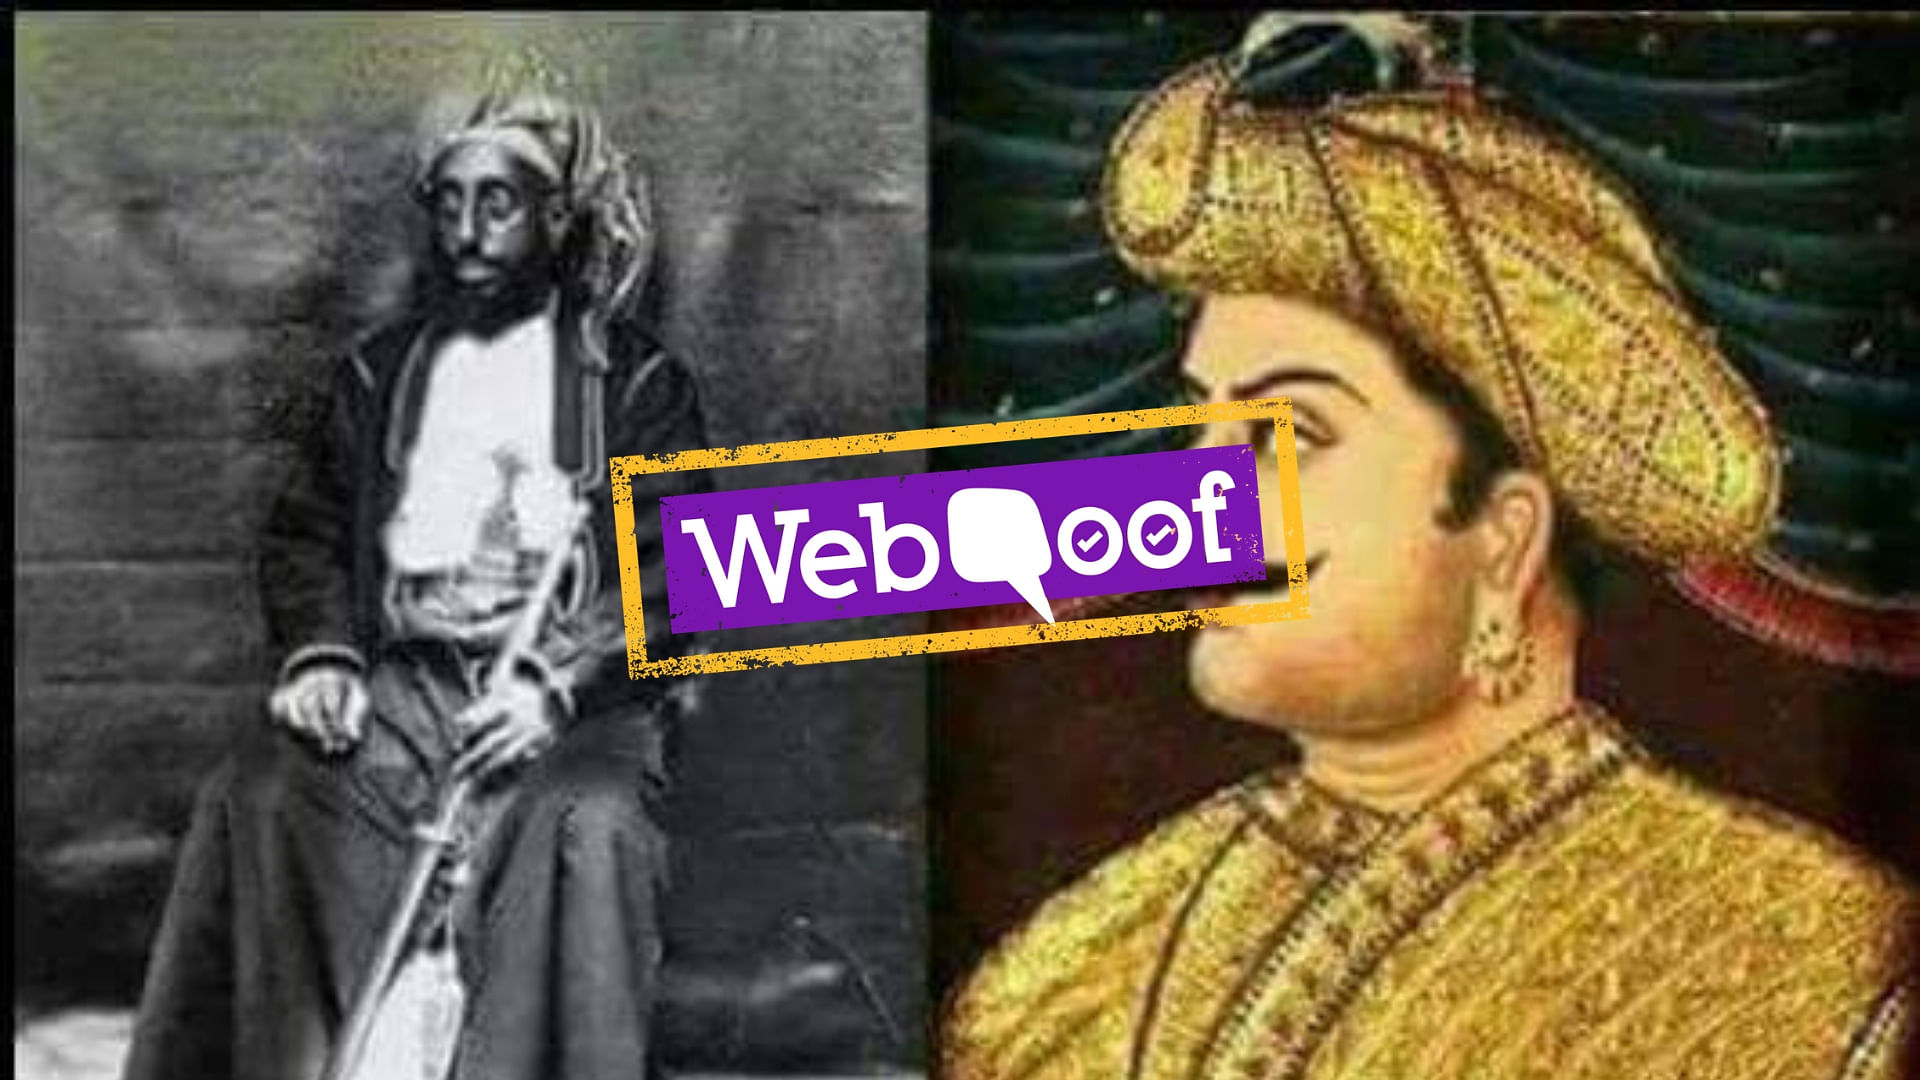 Fake and real pictures of Tipu Sultan.